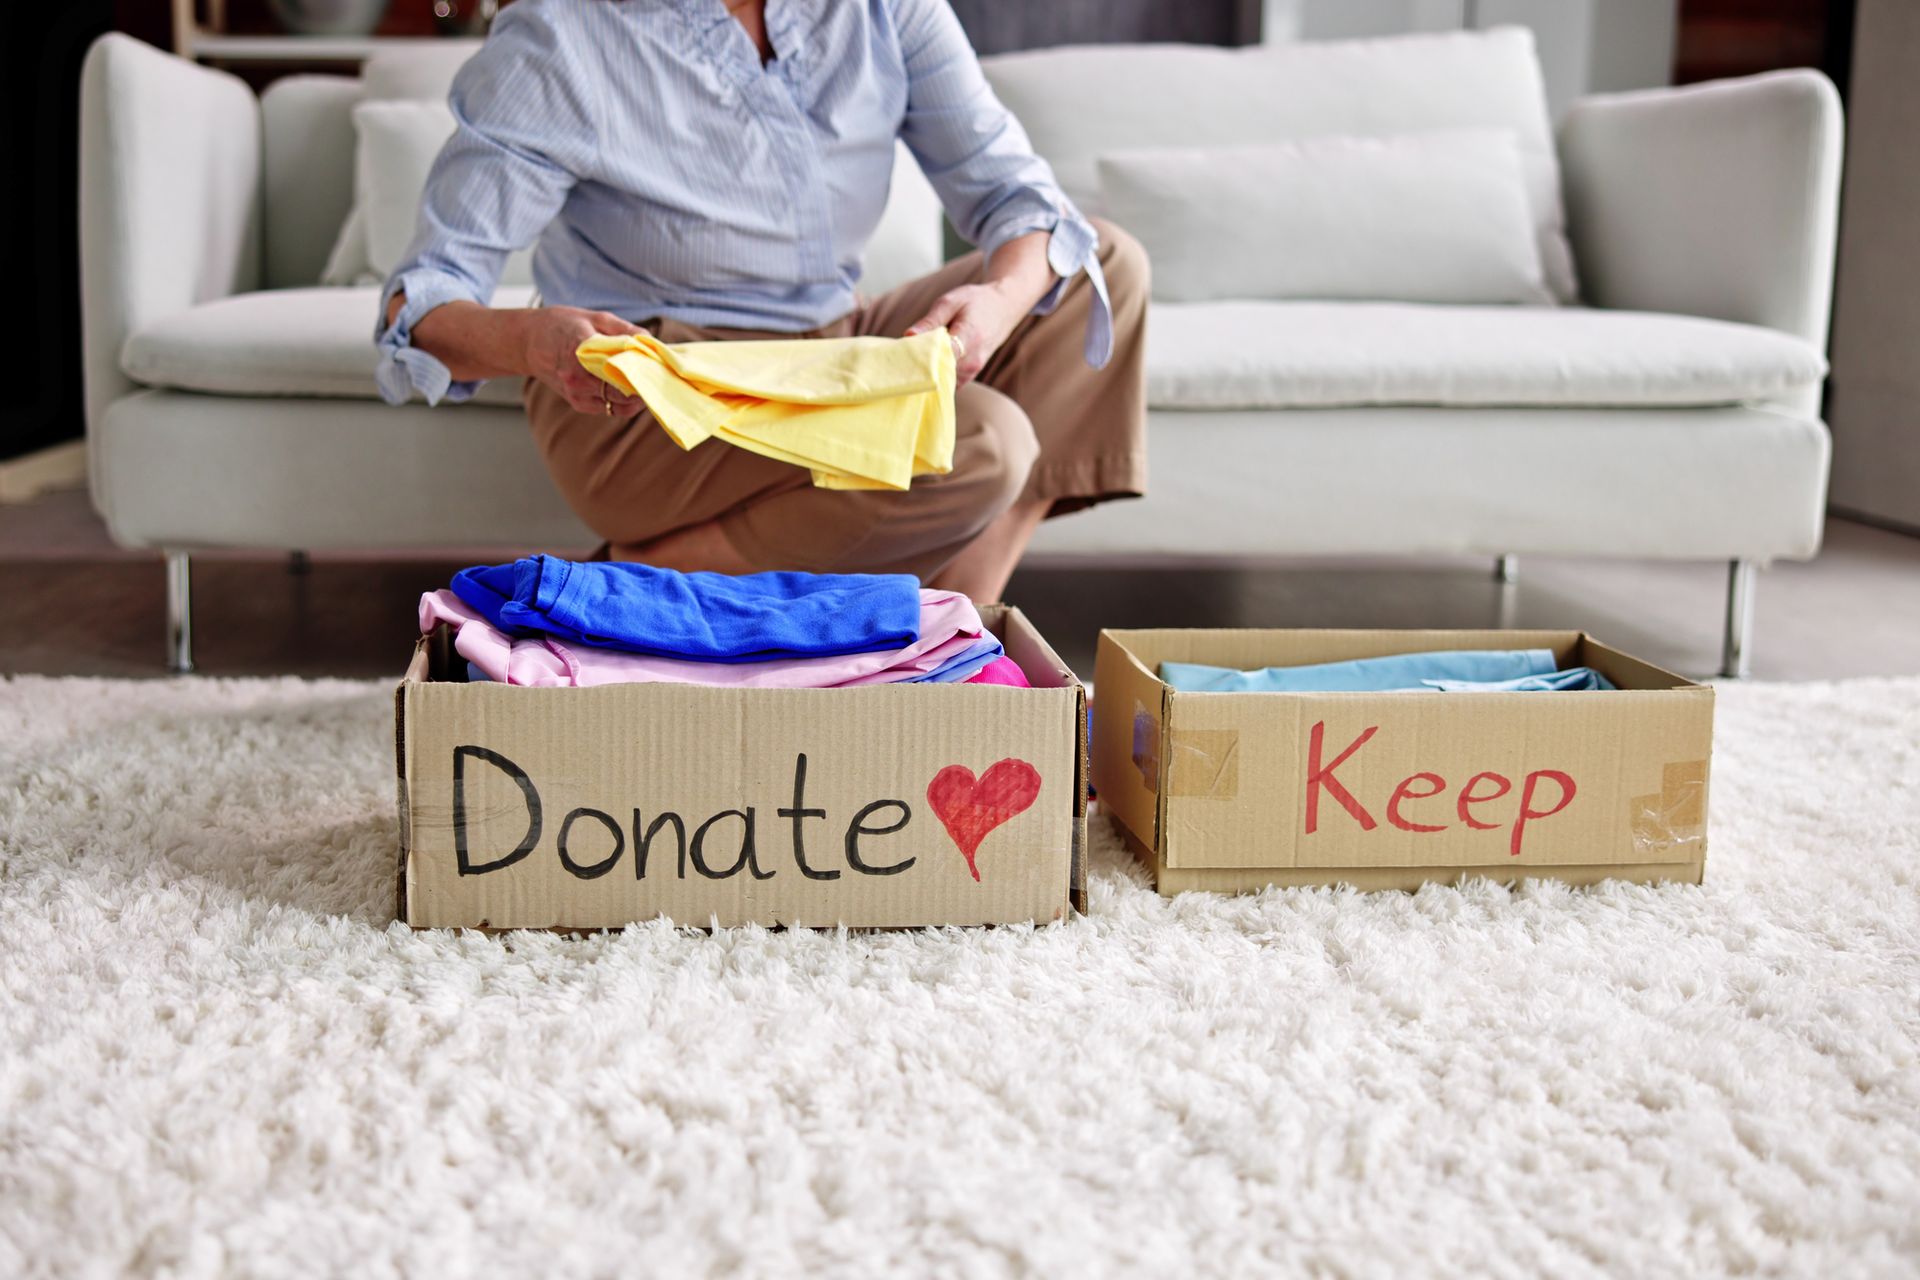 a cardboard box that says donate sits next to a cardboard box that says keep